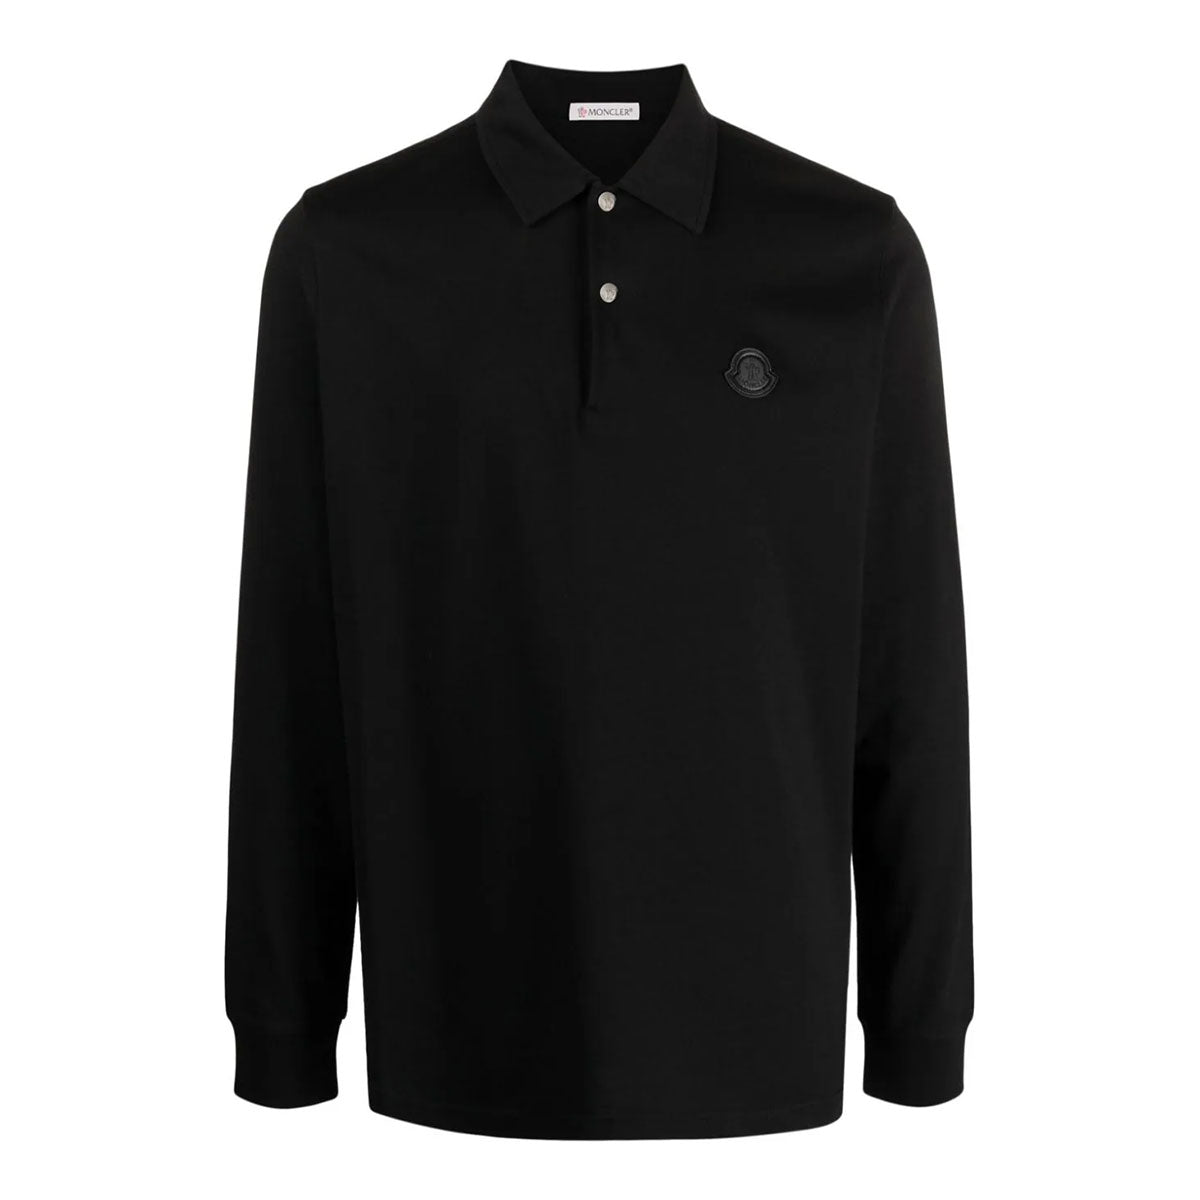 Long sleeve polo shirt | Why are you here?